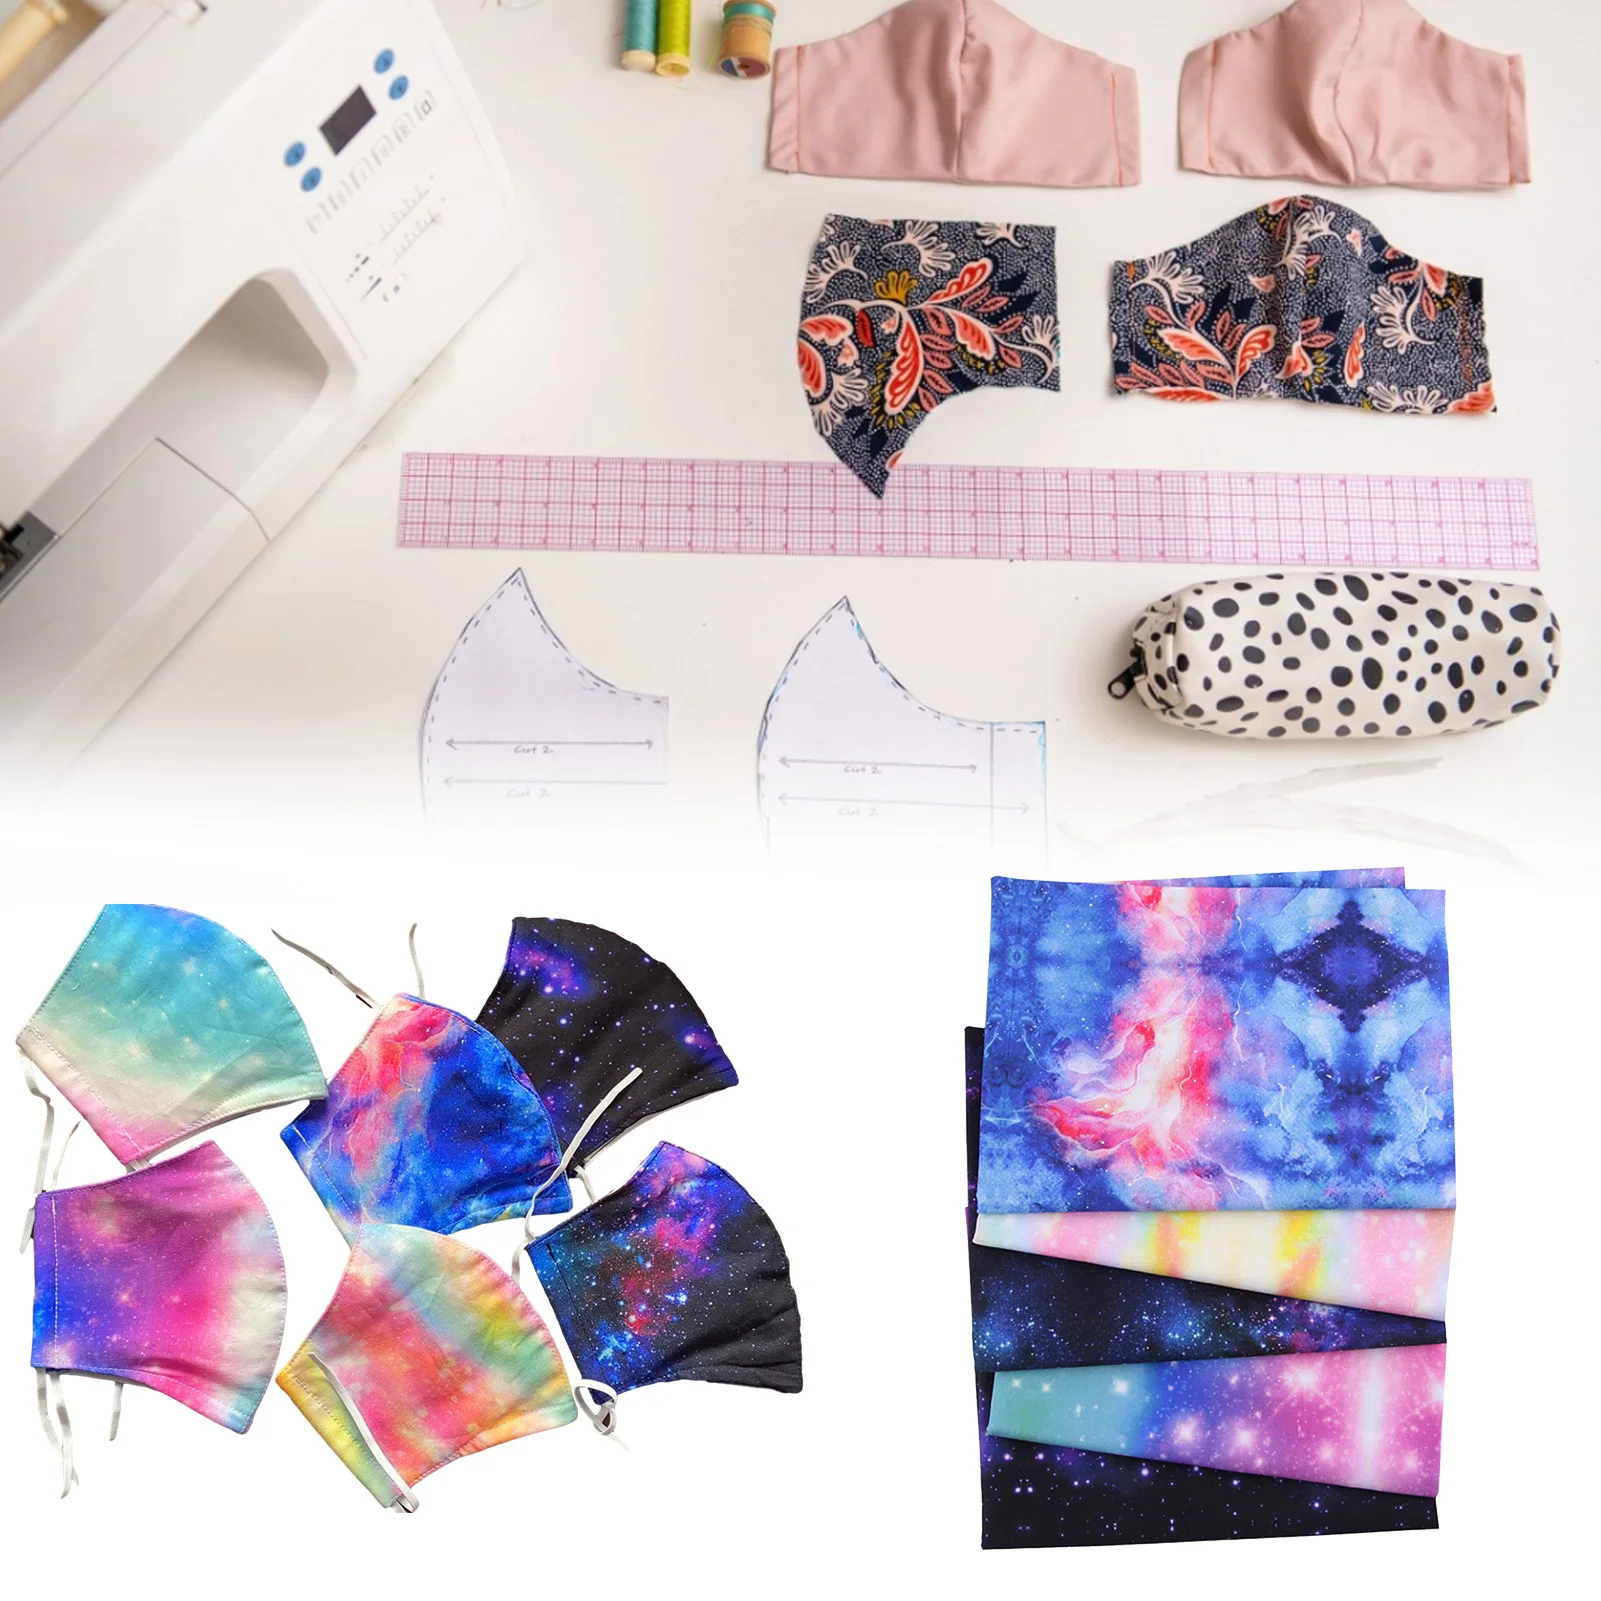 5pcs Galaxy Sky Cotton Fabric Set DIY Handmade Pure Cotton Square Fabric Set Small Wallet Doll Clothing Home Sewing Accessories images - 6